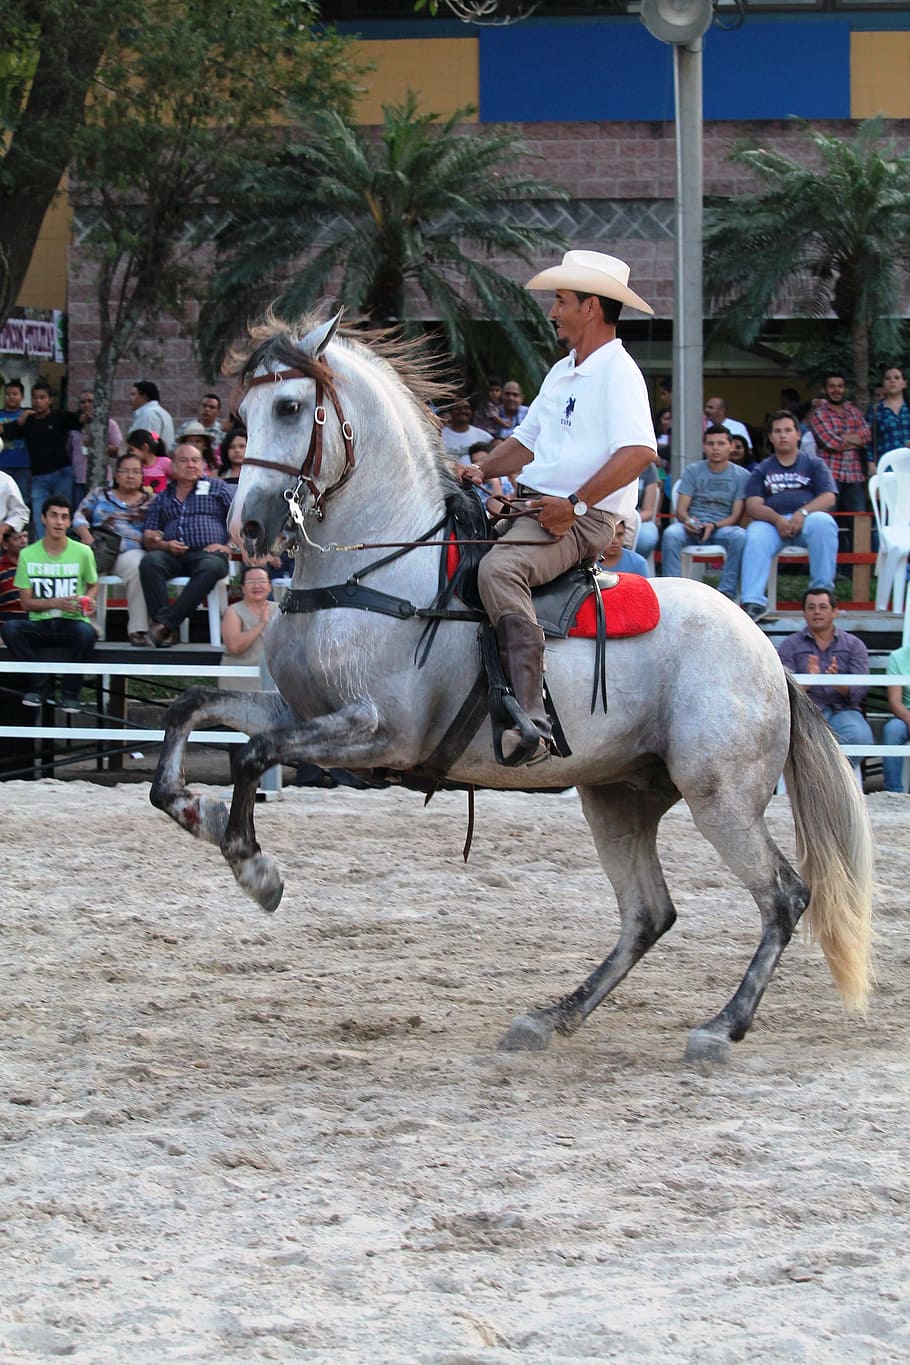 Cowboy, Horse, Rider, Party, Animal, horse, rider, party, animal, colt, stable, jaripeo